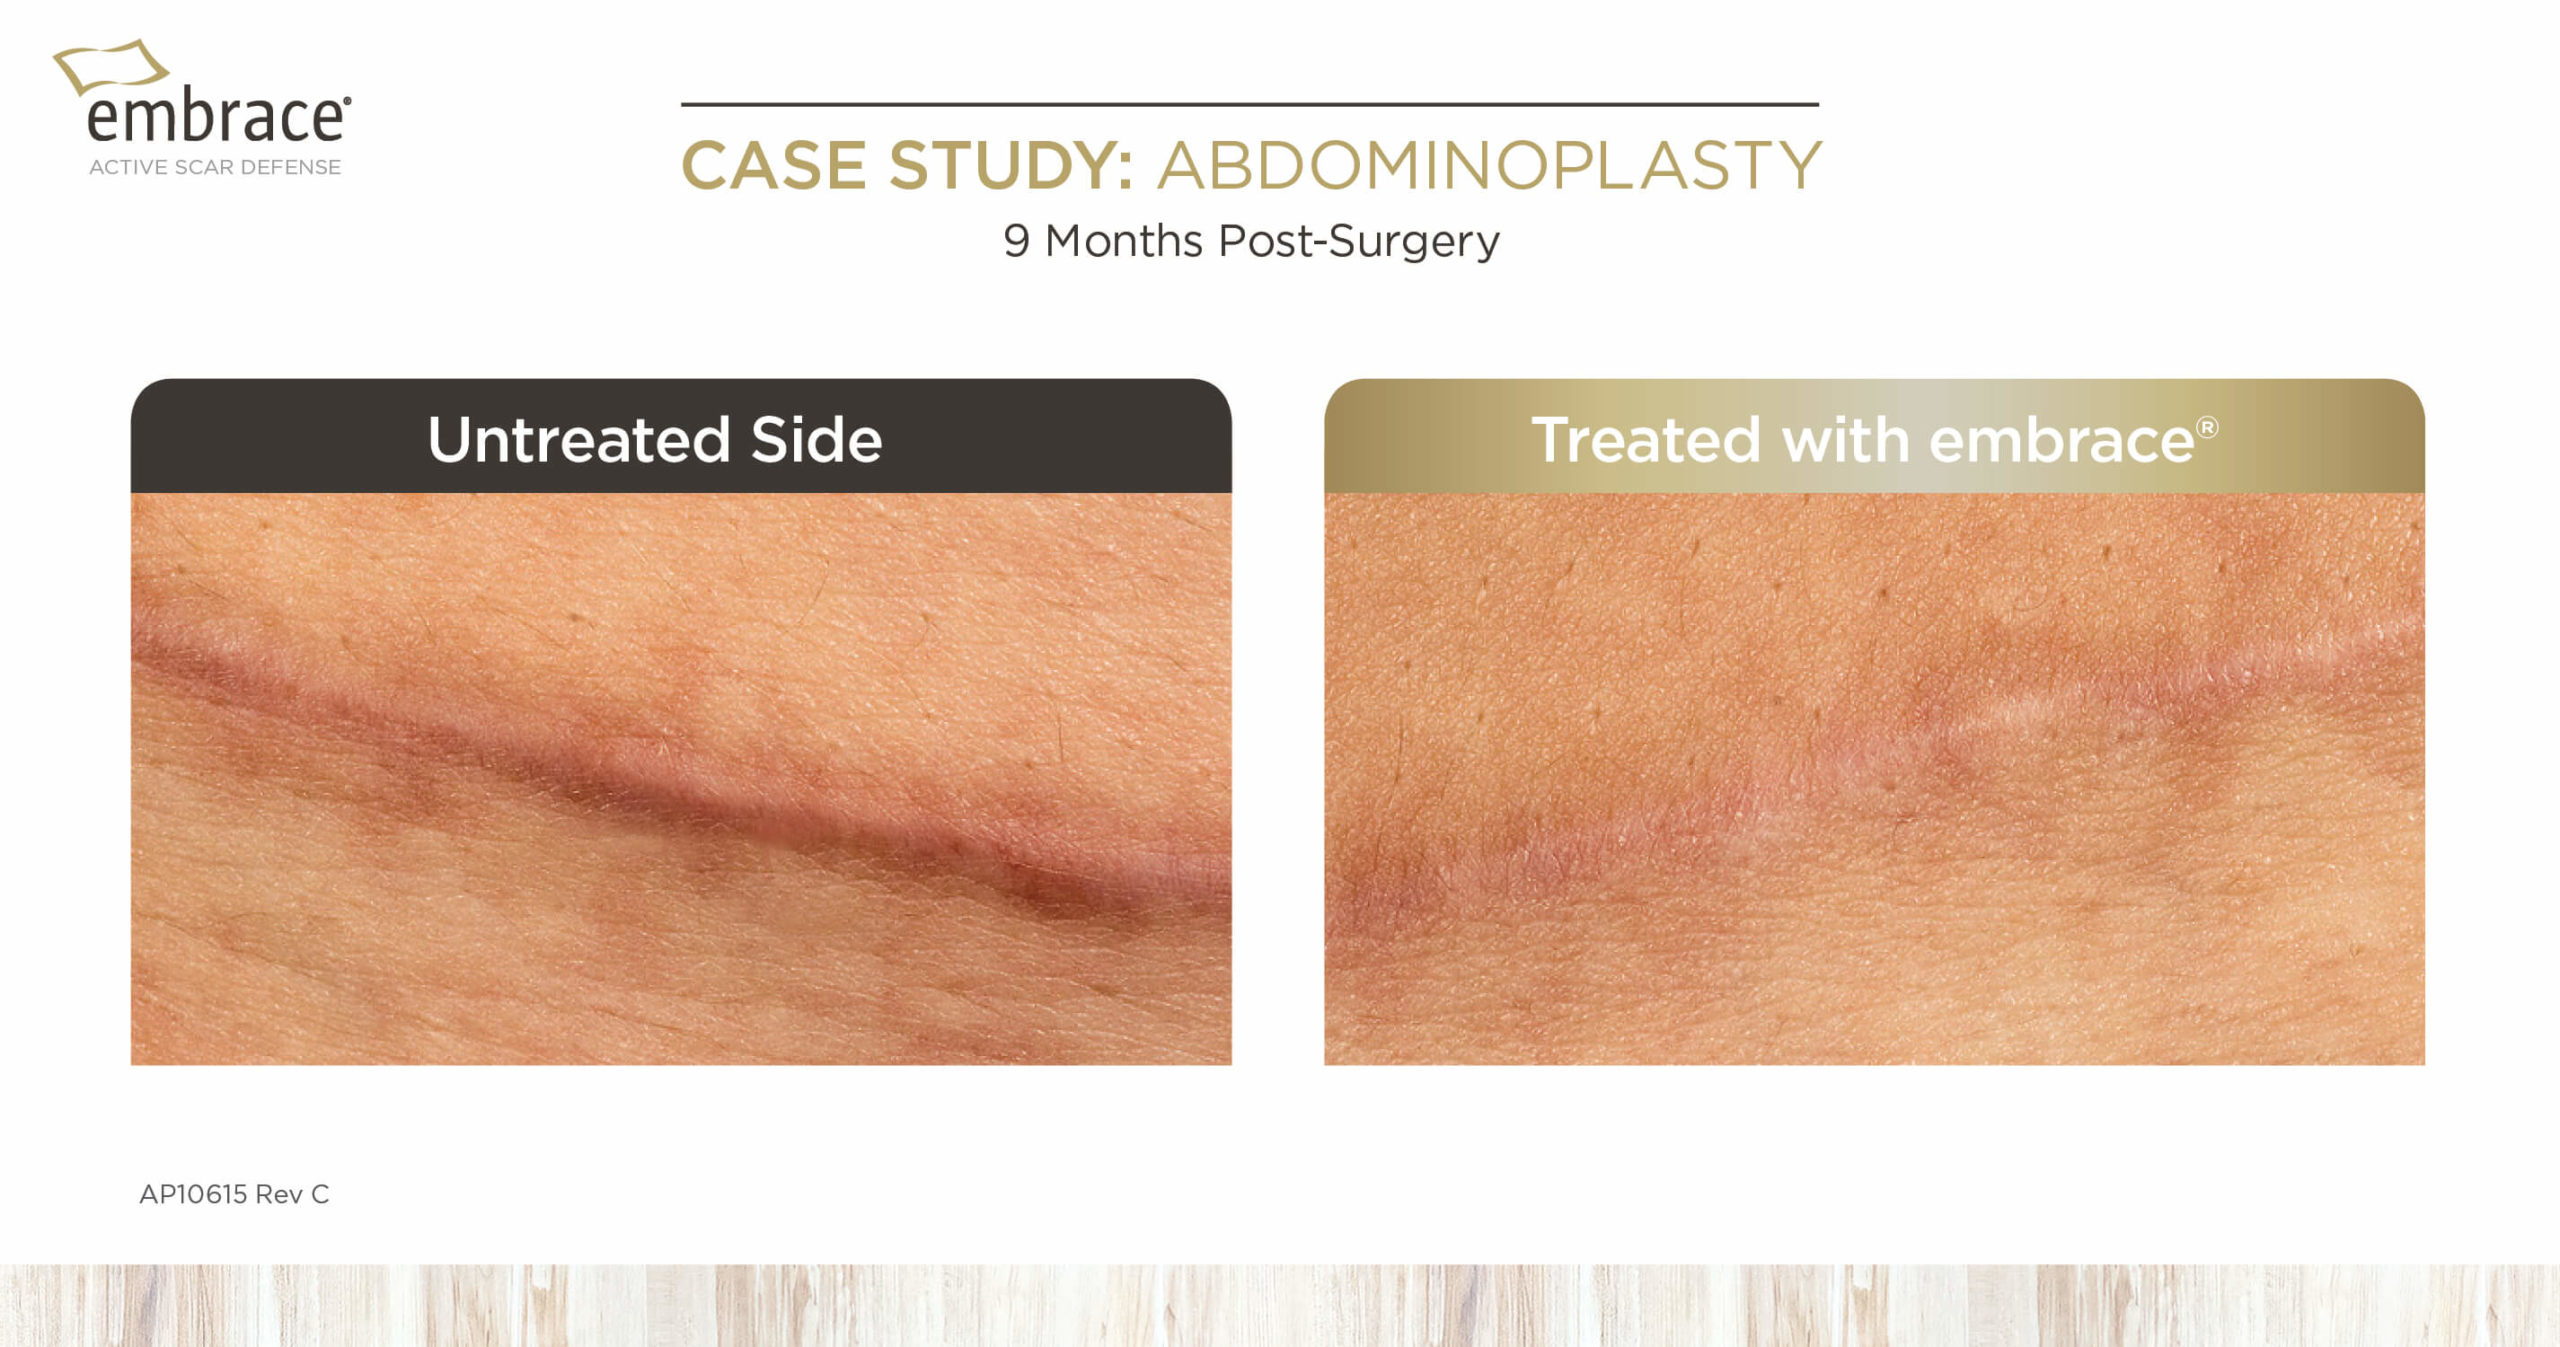 Abdominoplasty untreated vs treated with embrace